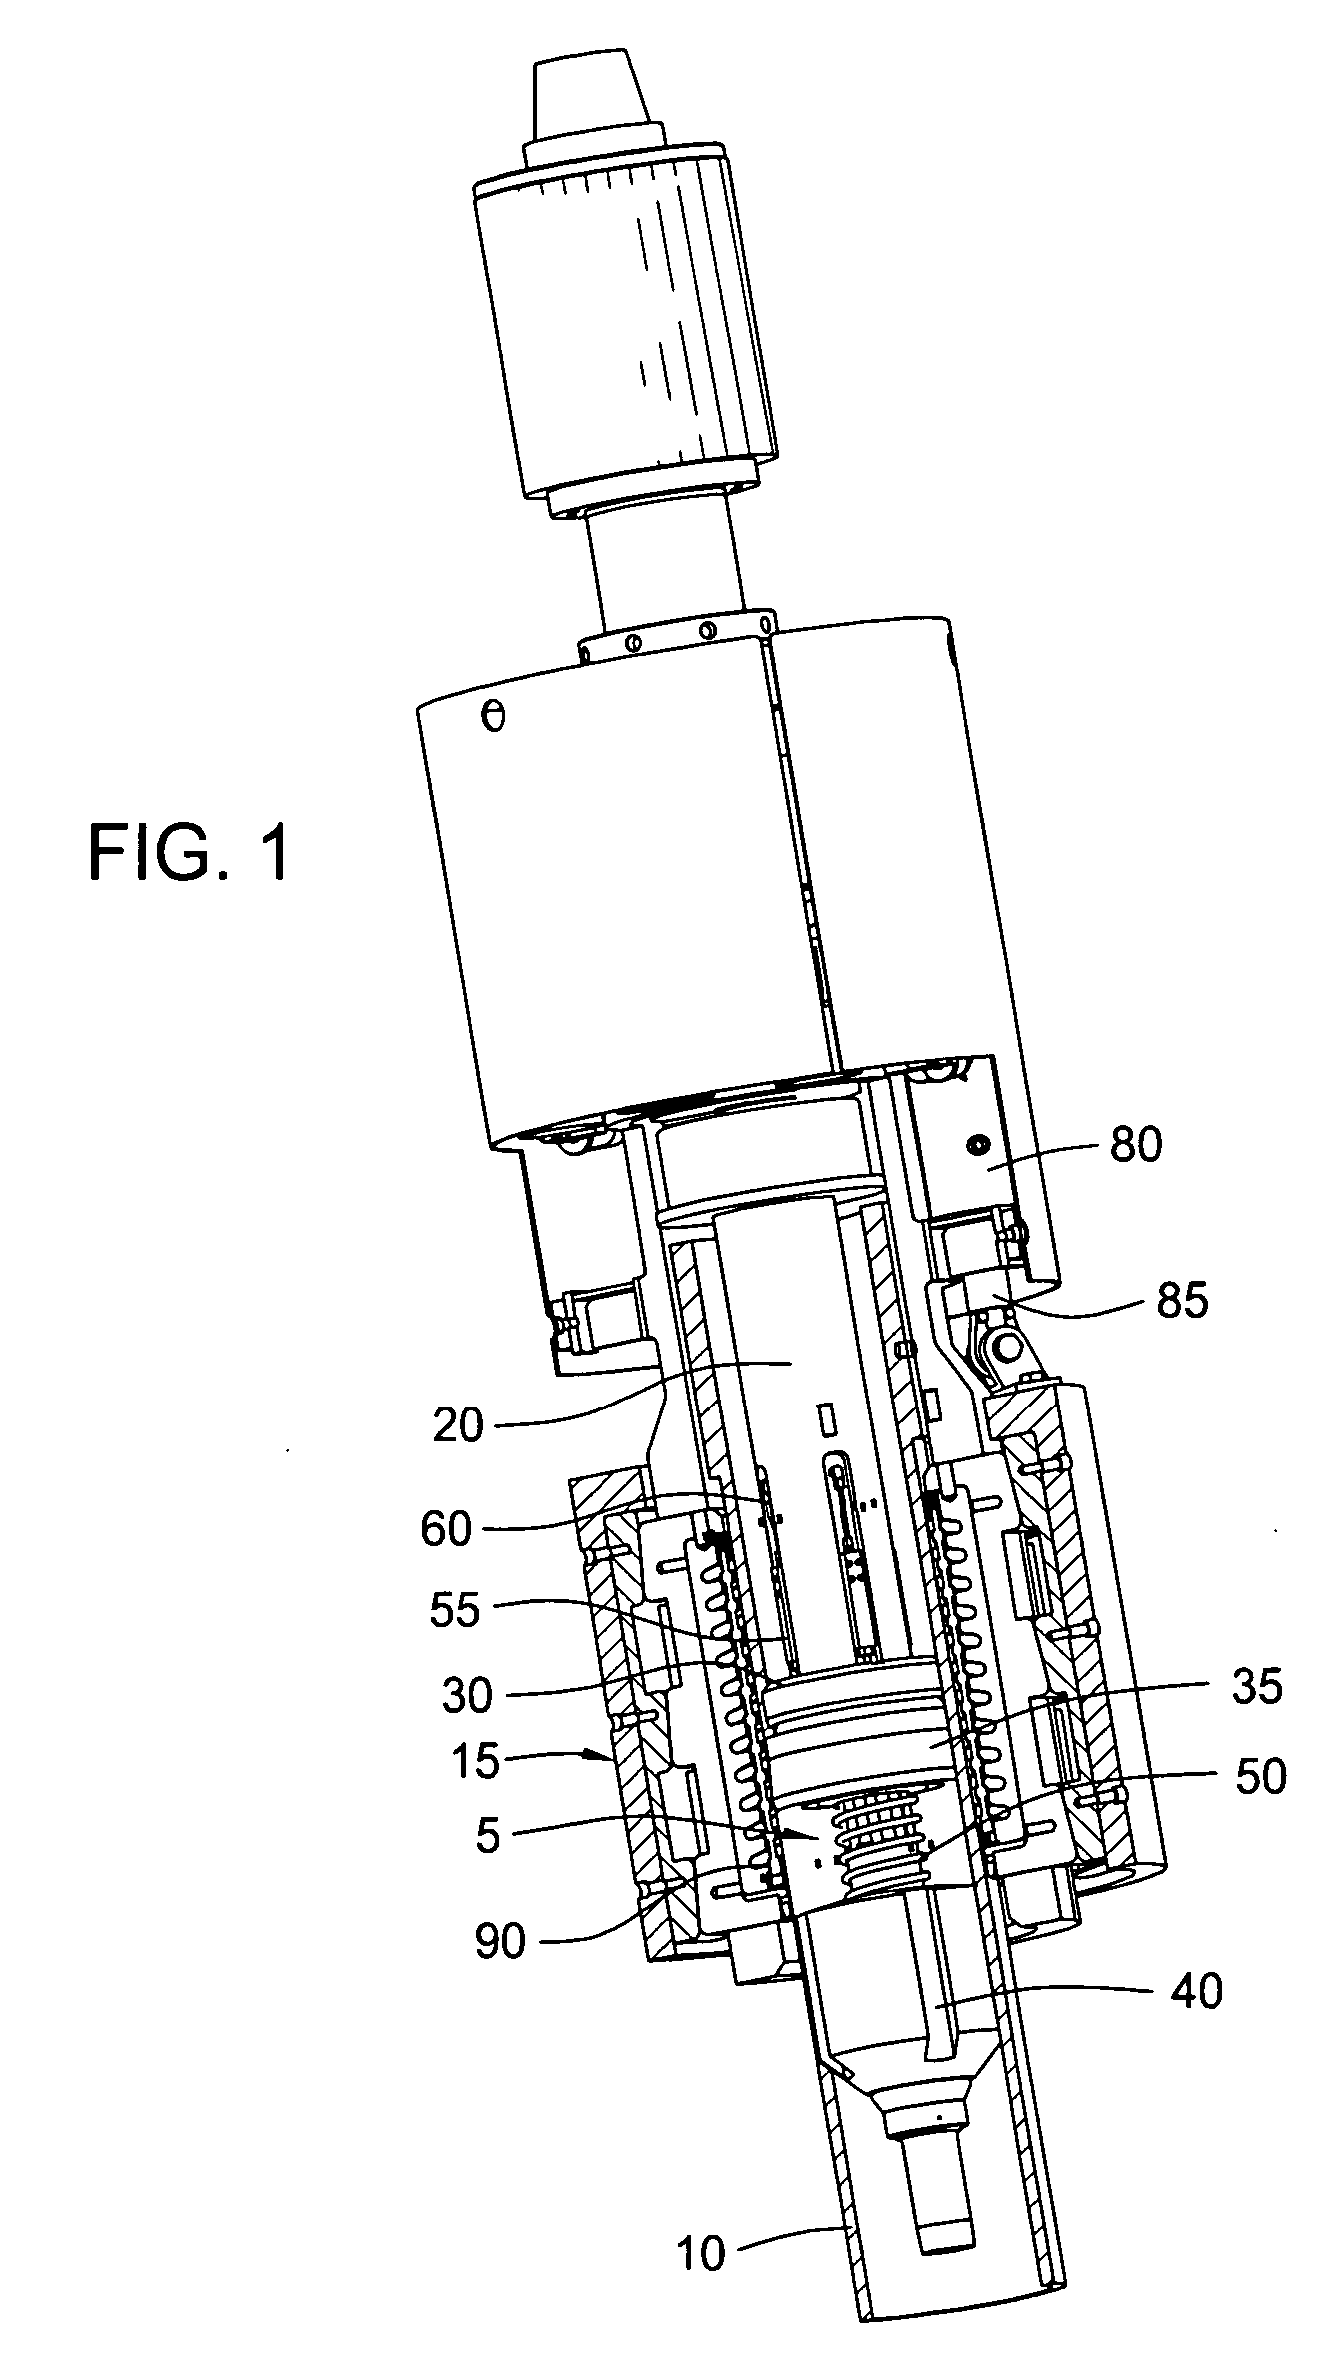 One-position fill-up and circulating tool